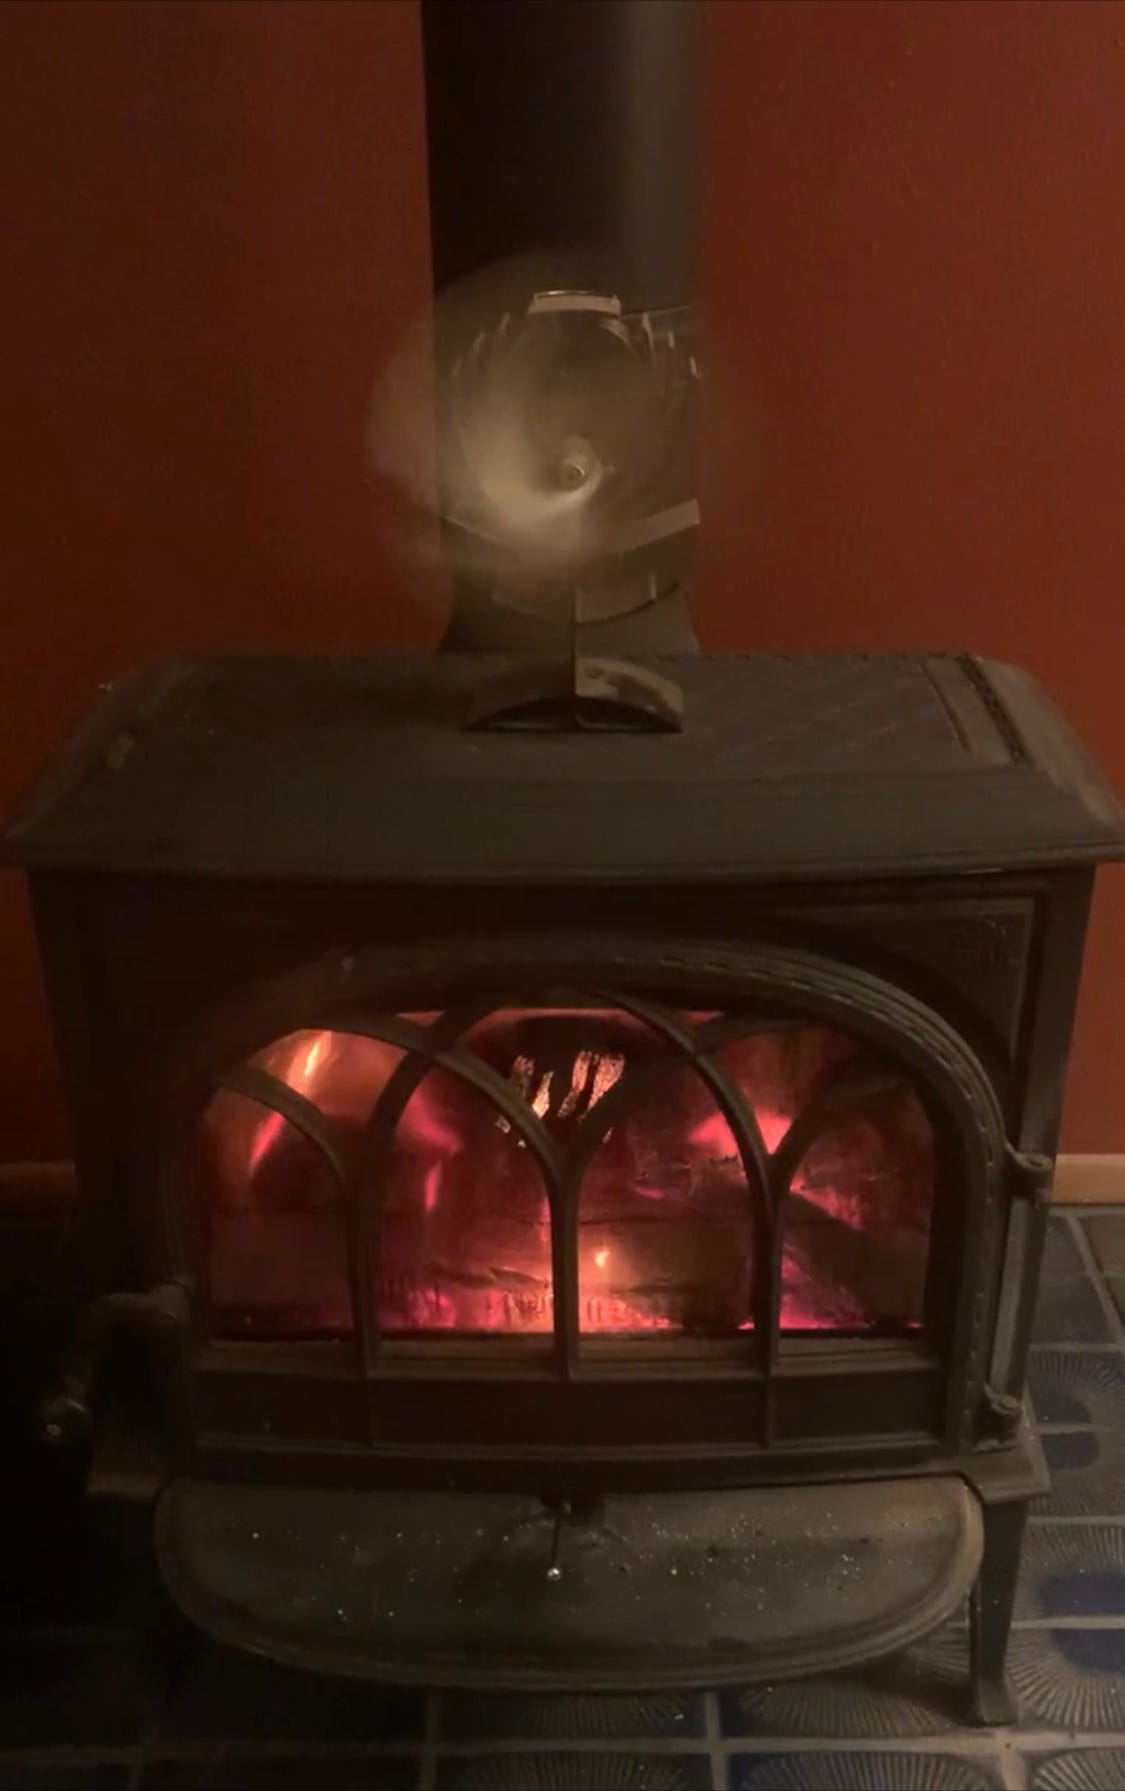 A fire in a cast iron stove with a heat-operated fan spinning atop it.